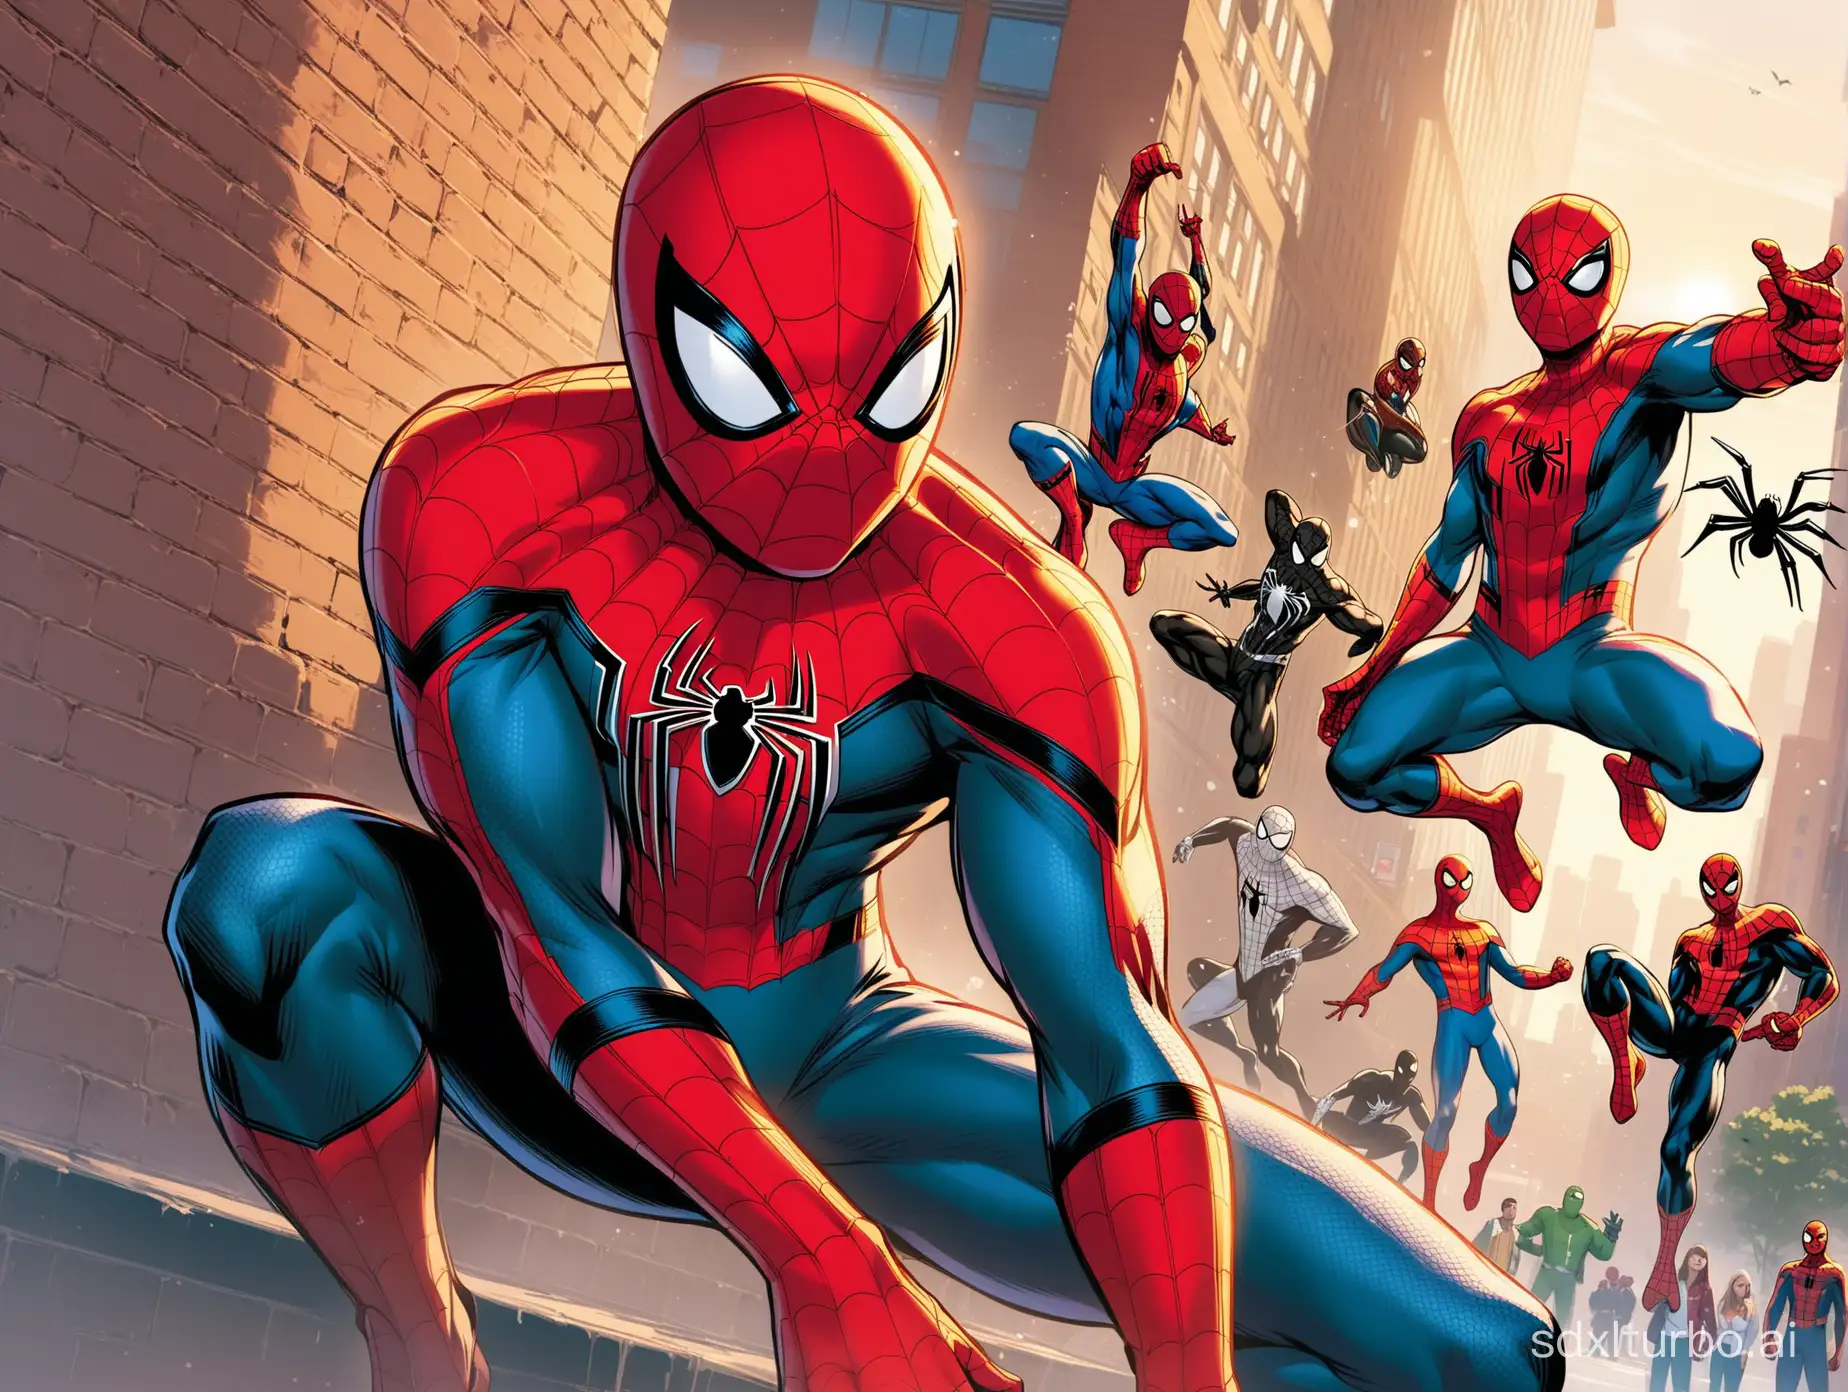 SpiderMan-and-Friends-in-ActionPacked-Cityscape